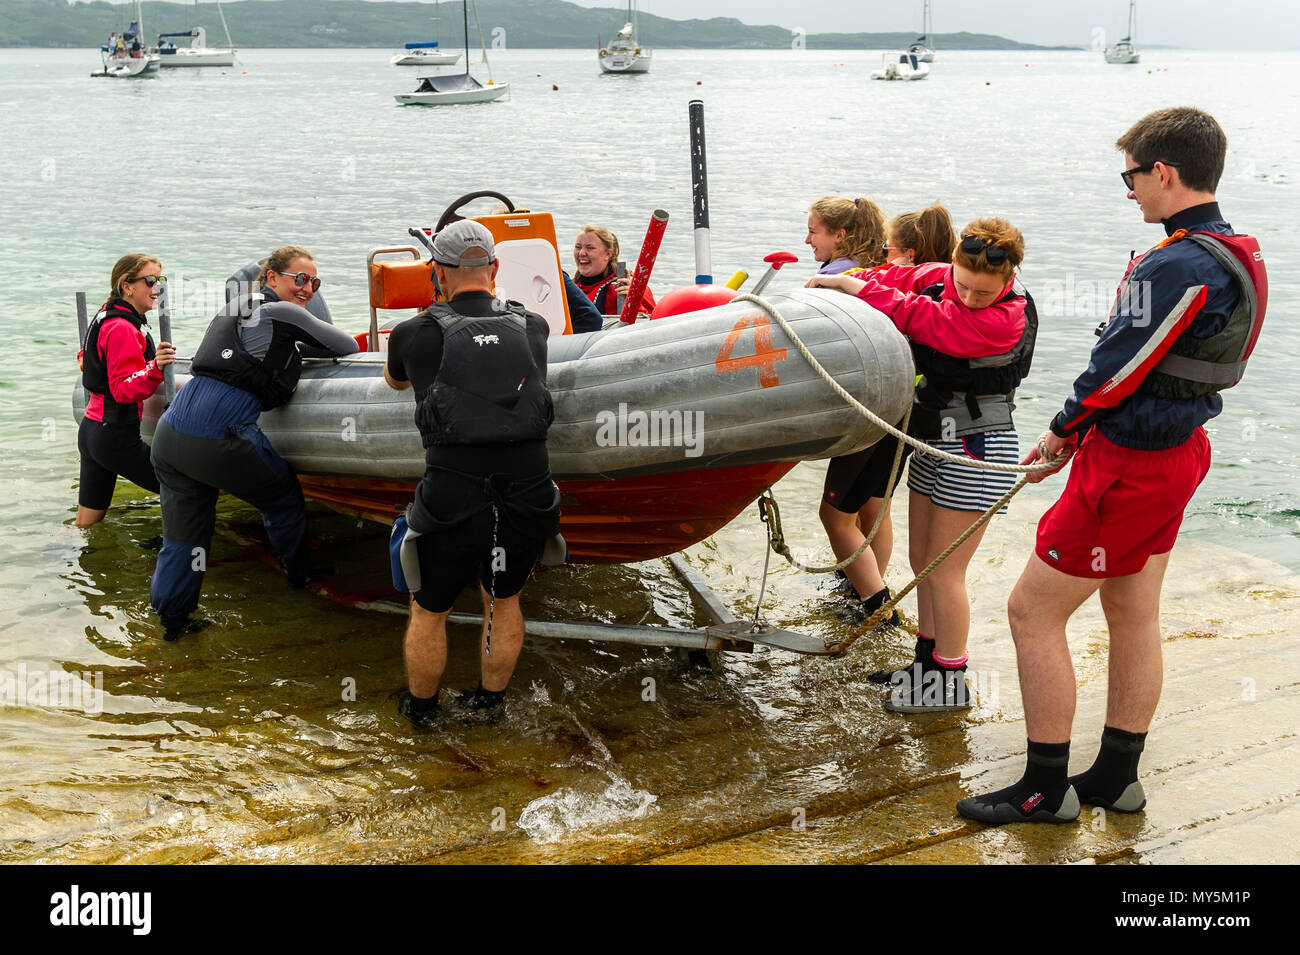 Schull, Ireland. 6th June, 2018. After a dull and overcast start this morning, the sun will burn off the clouds and make an appearance this afternoon giving highs of 21 C. Participants undertaking a Dinghy Instructor Course at Fastnet Marine Outdoor Education Centre in Schull launch a RIB as part of their training.  Credit: Andy Gibson/Alamy Live News. Stock Photo